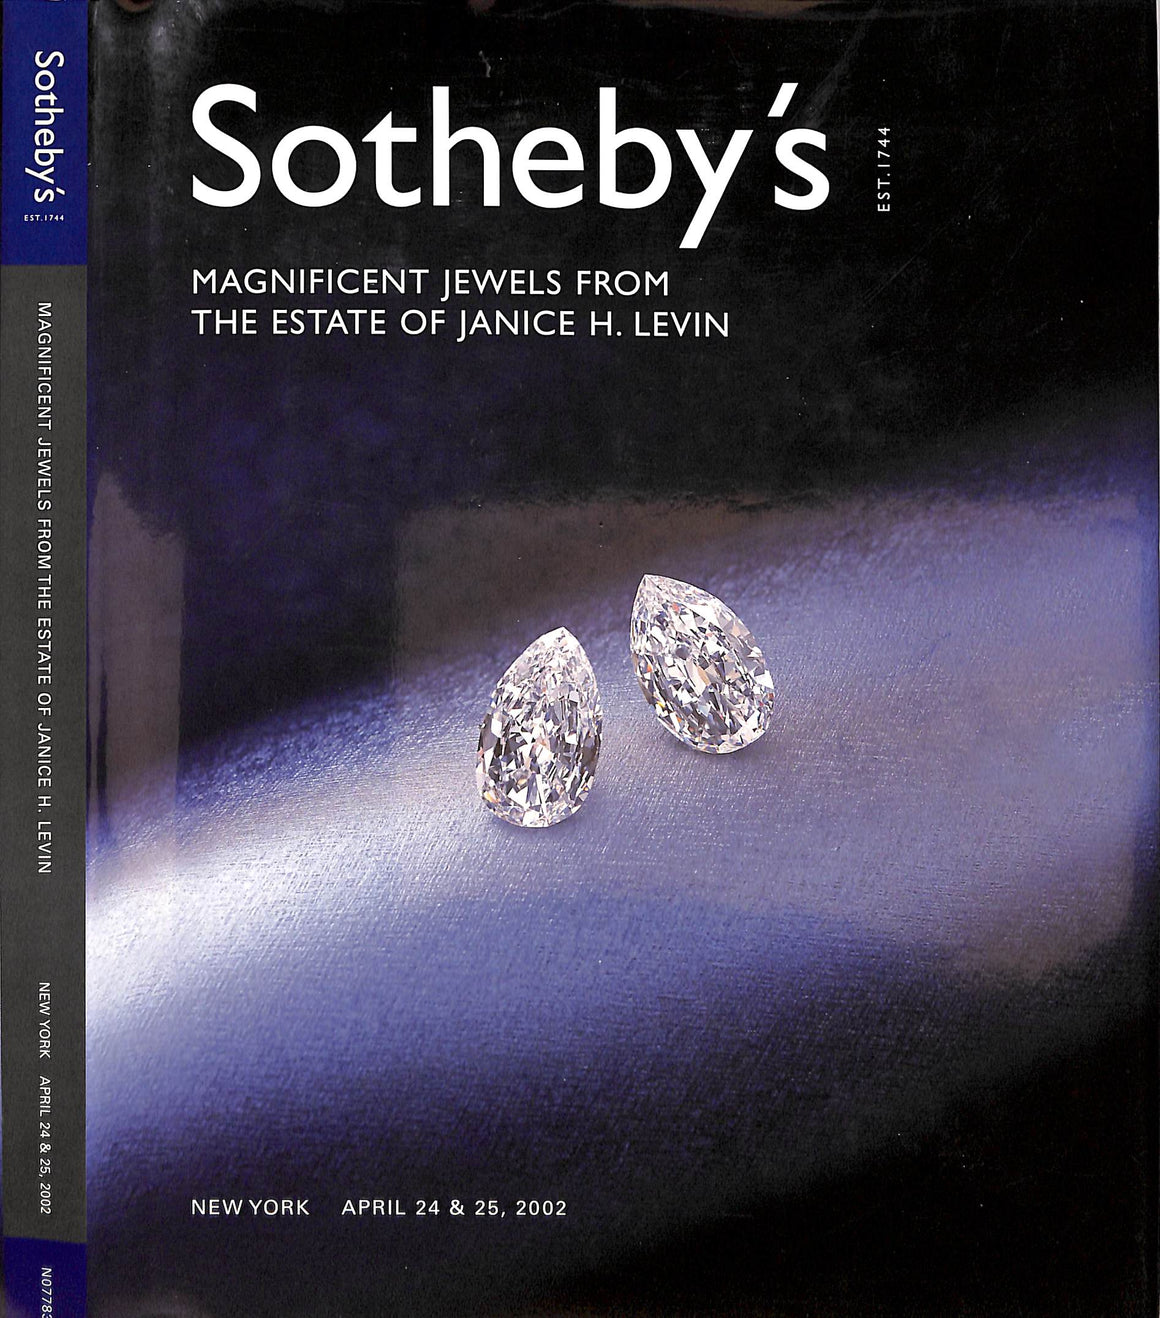 Magnificent Jewels From The Estate Of Janice H. Levin 2002 Sotheby's